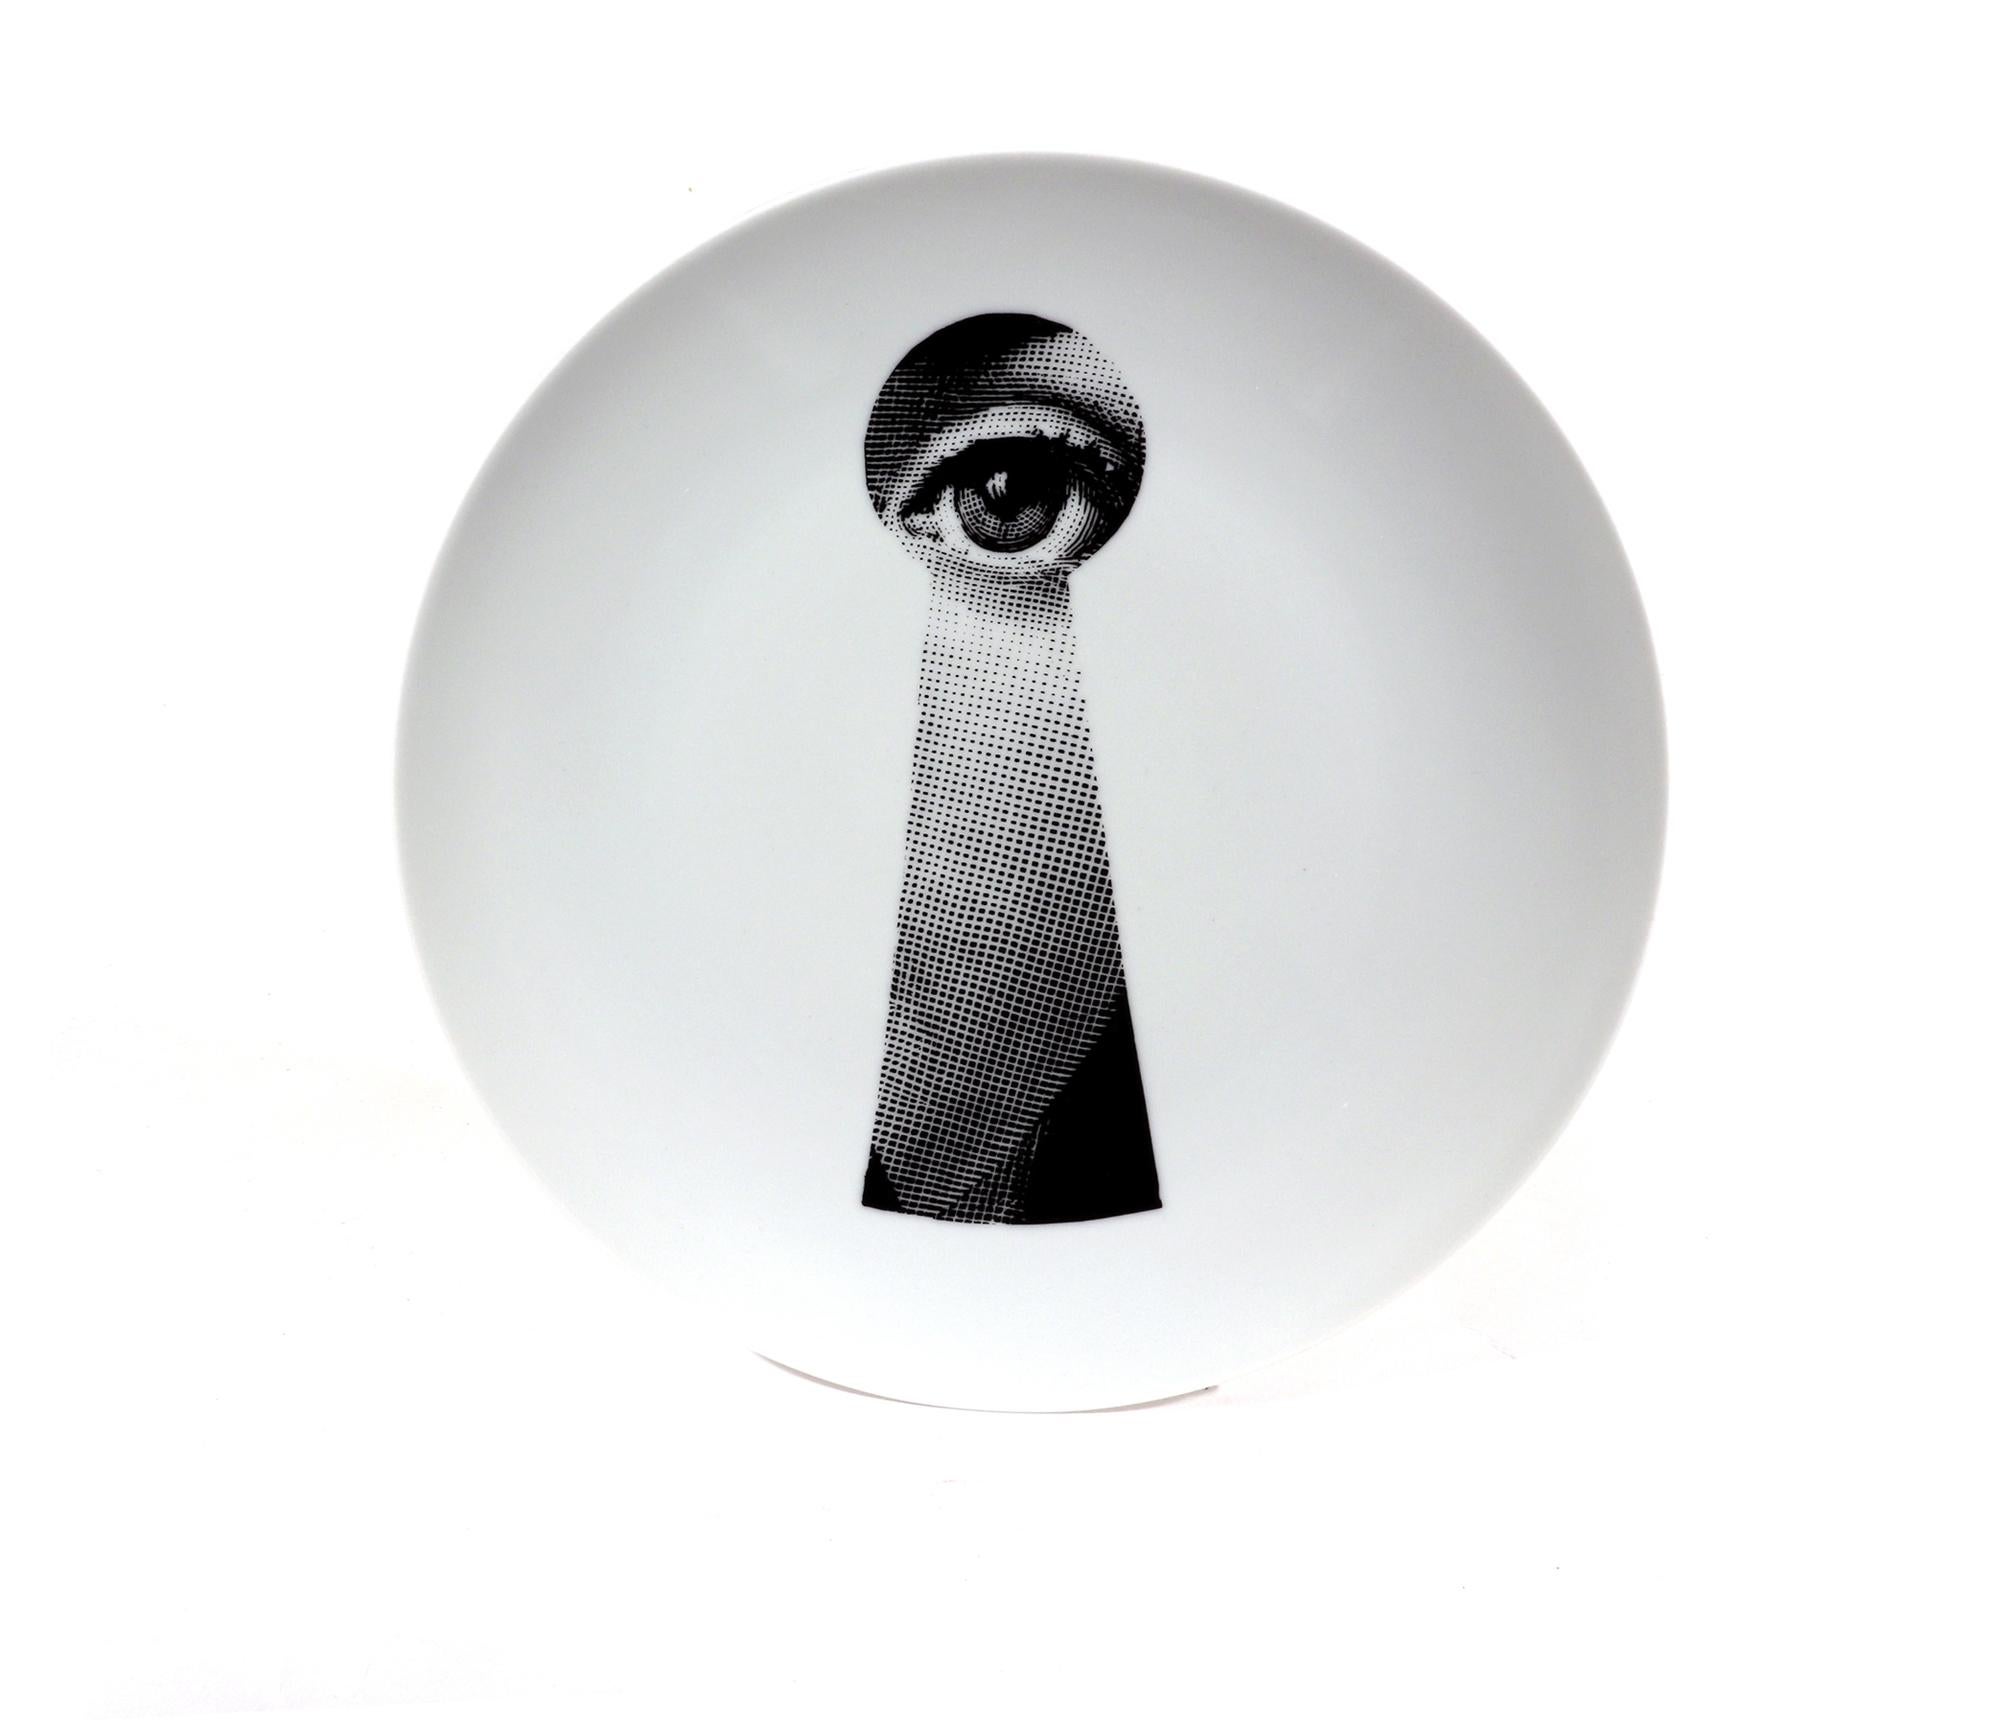 Vintage Fornasetti Porcelain Themes & Variation Plate #14,
The Keyhole,
Atelier Fornasetti

The Surreal Fornasetti porcelain plate in the Themes & Variation pattern depicts a keyhole with the face of Lina Cavalieri, Piero Fornasetti's muse